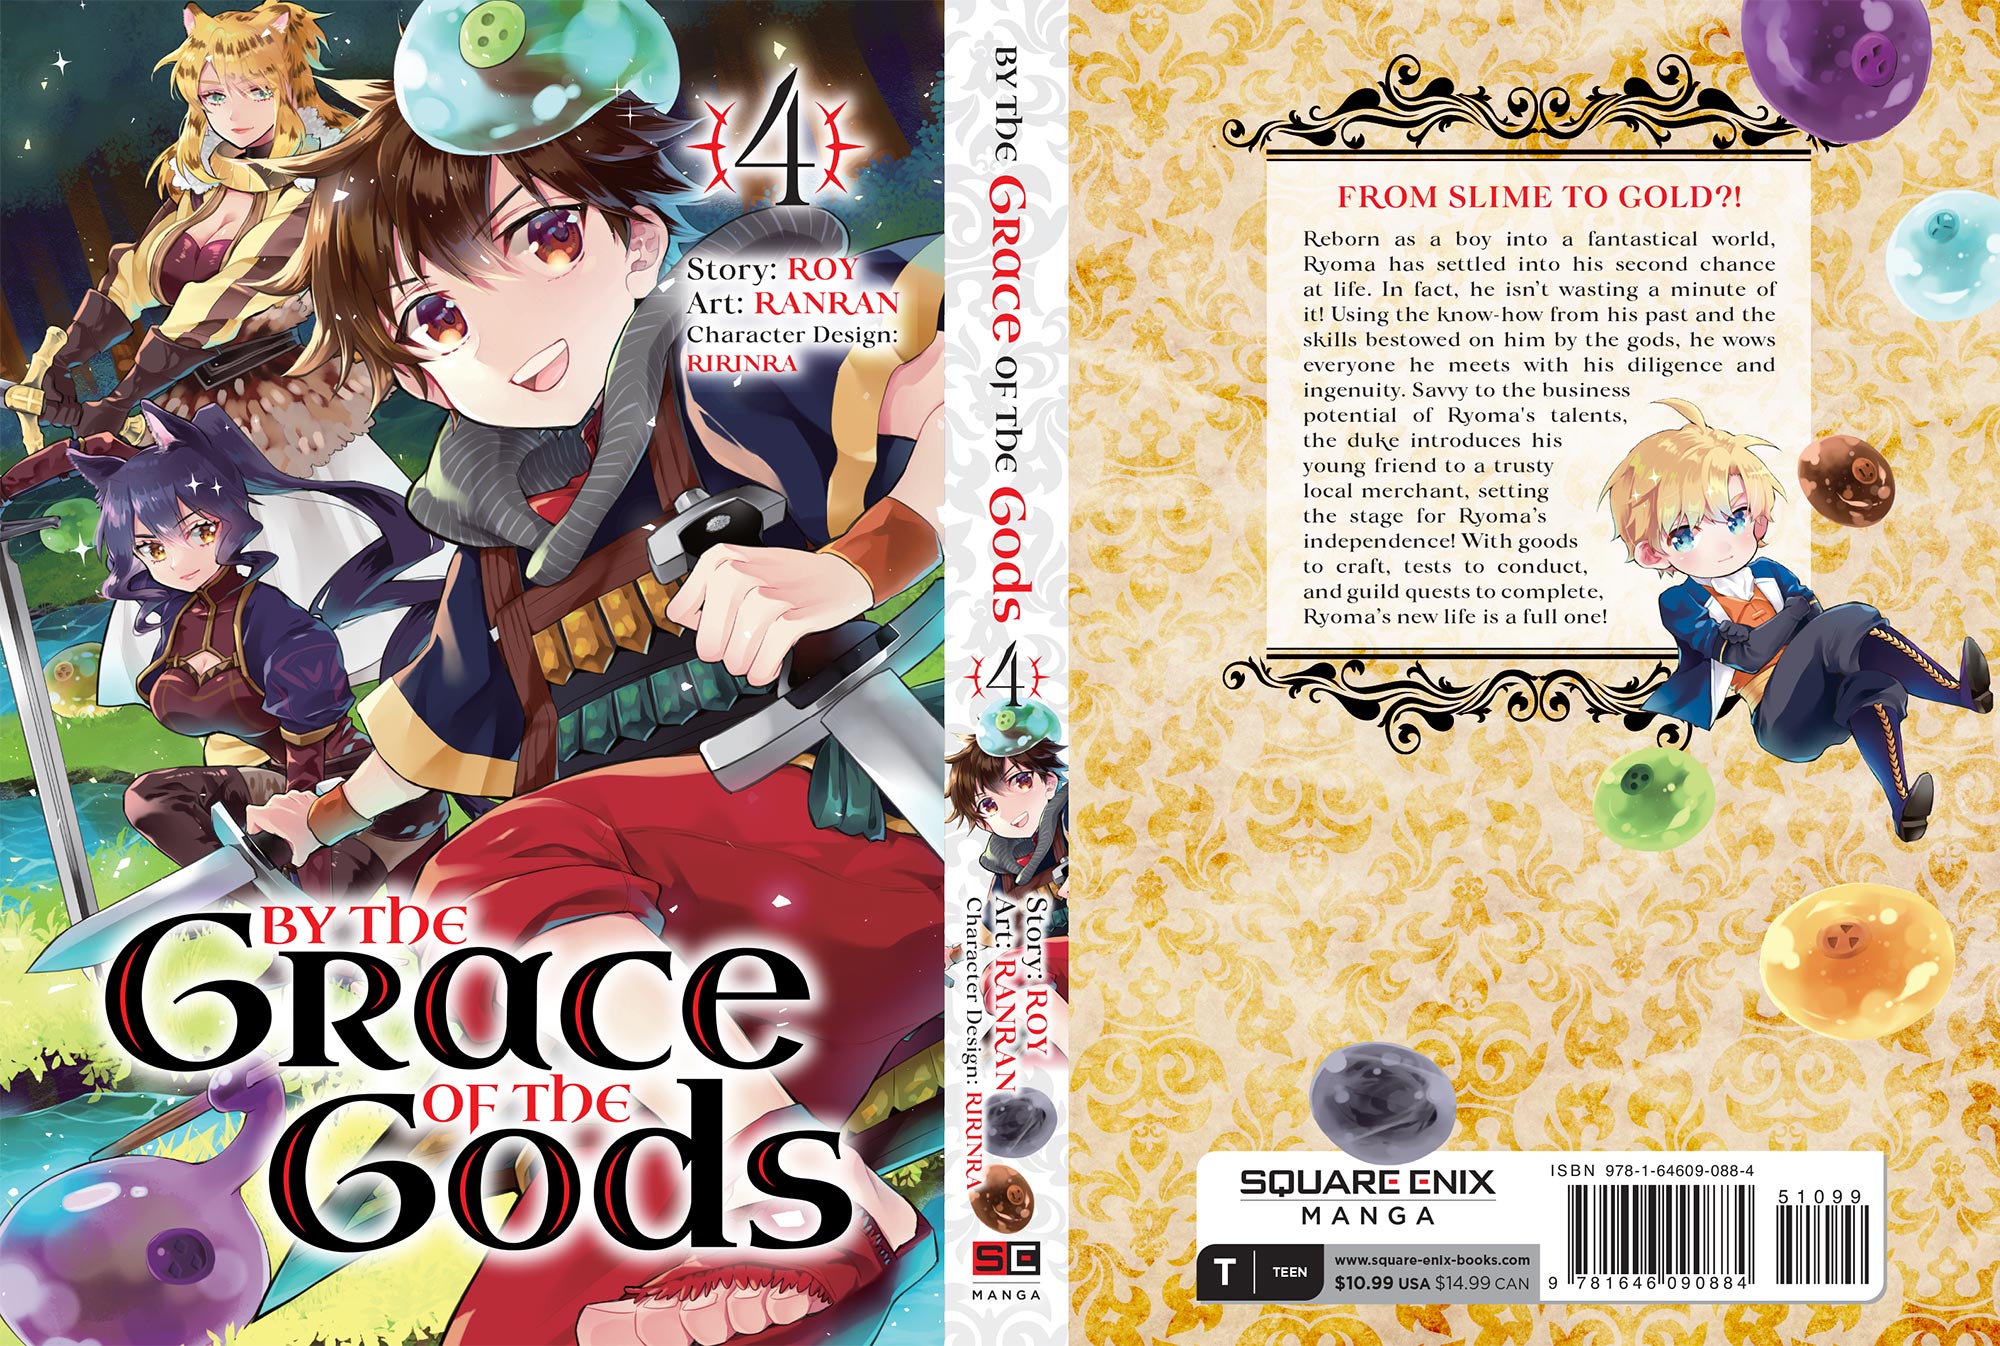 By the Grace of the Gods Volume 2 Manga Review - TheOASG